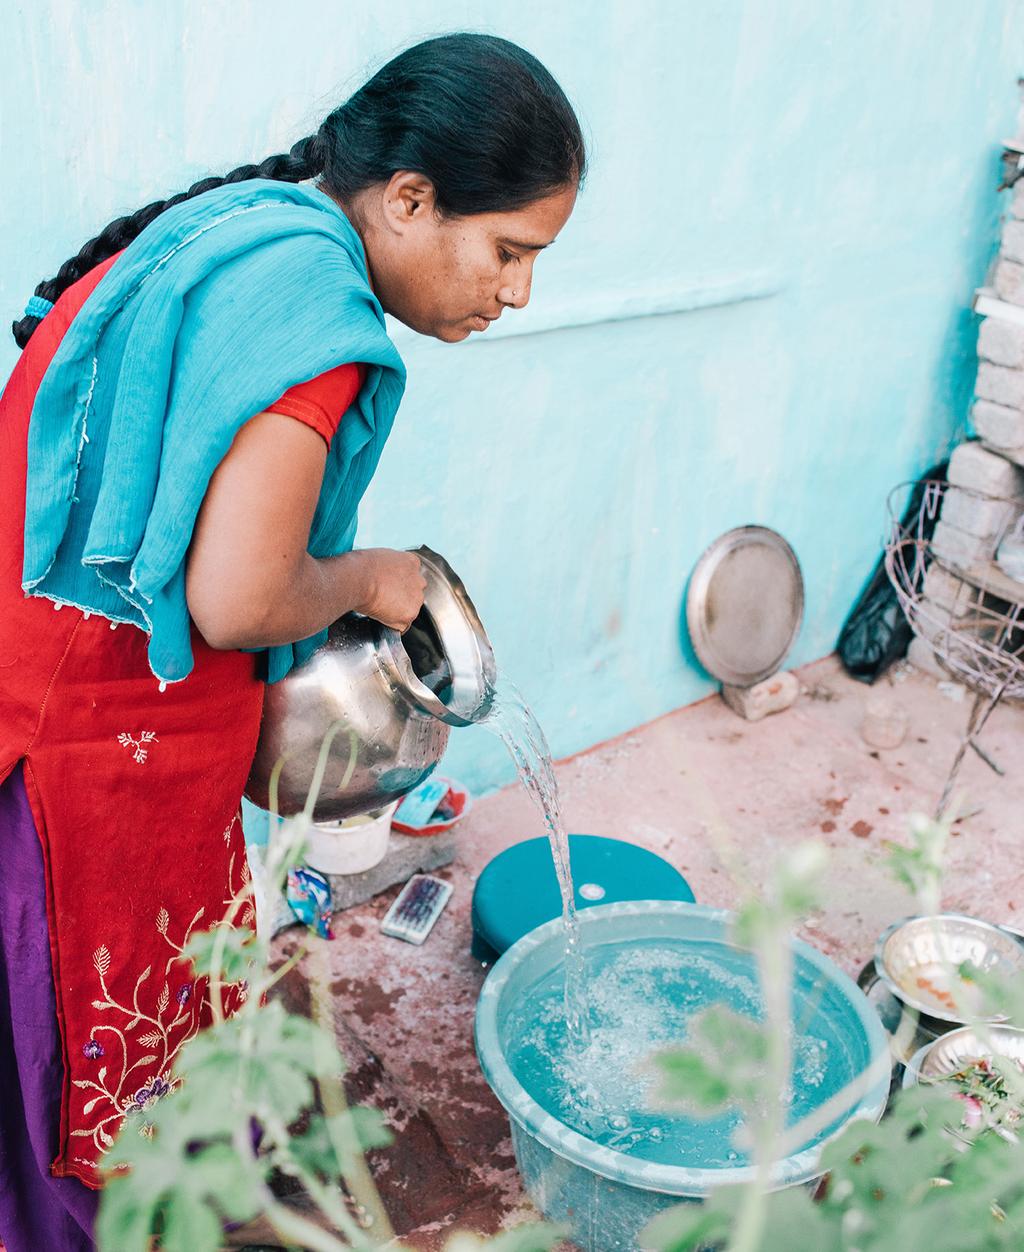 Access to safe water and sanitation makes a life-changing and often lifesaving difference.